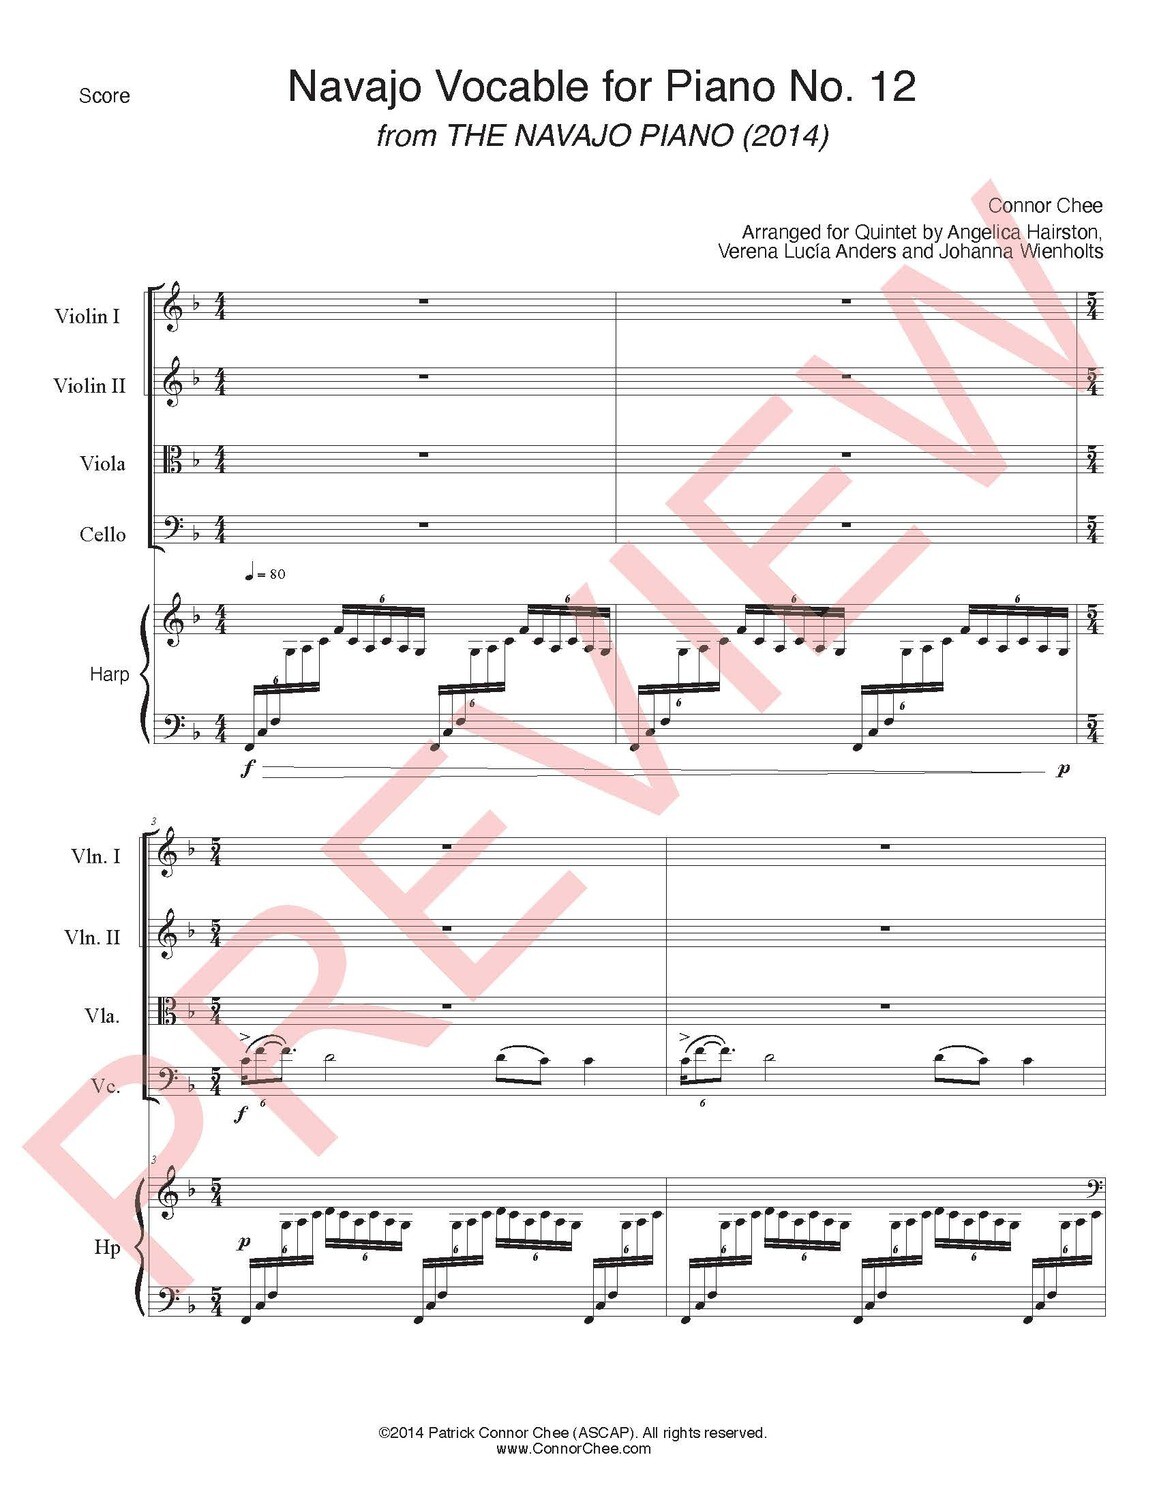 Digital Sheet Music - Navajo Vocable No. 12 (Arranged for Quintet) (Connor Chee)